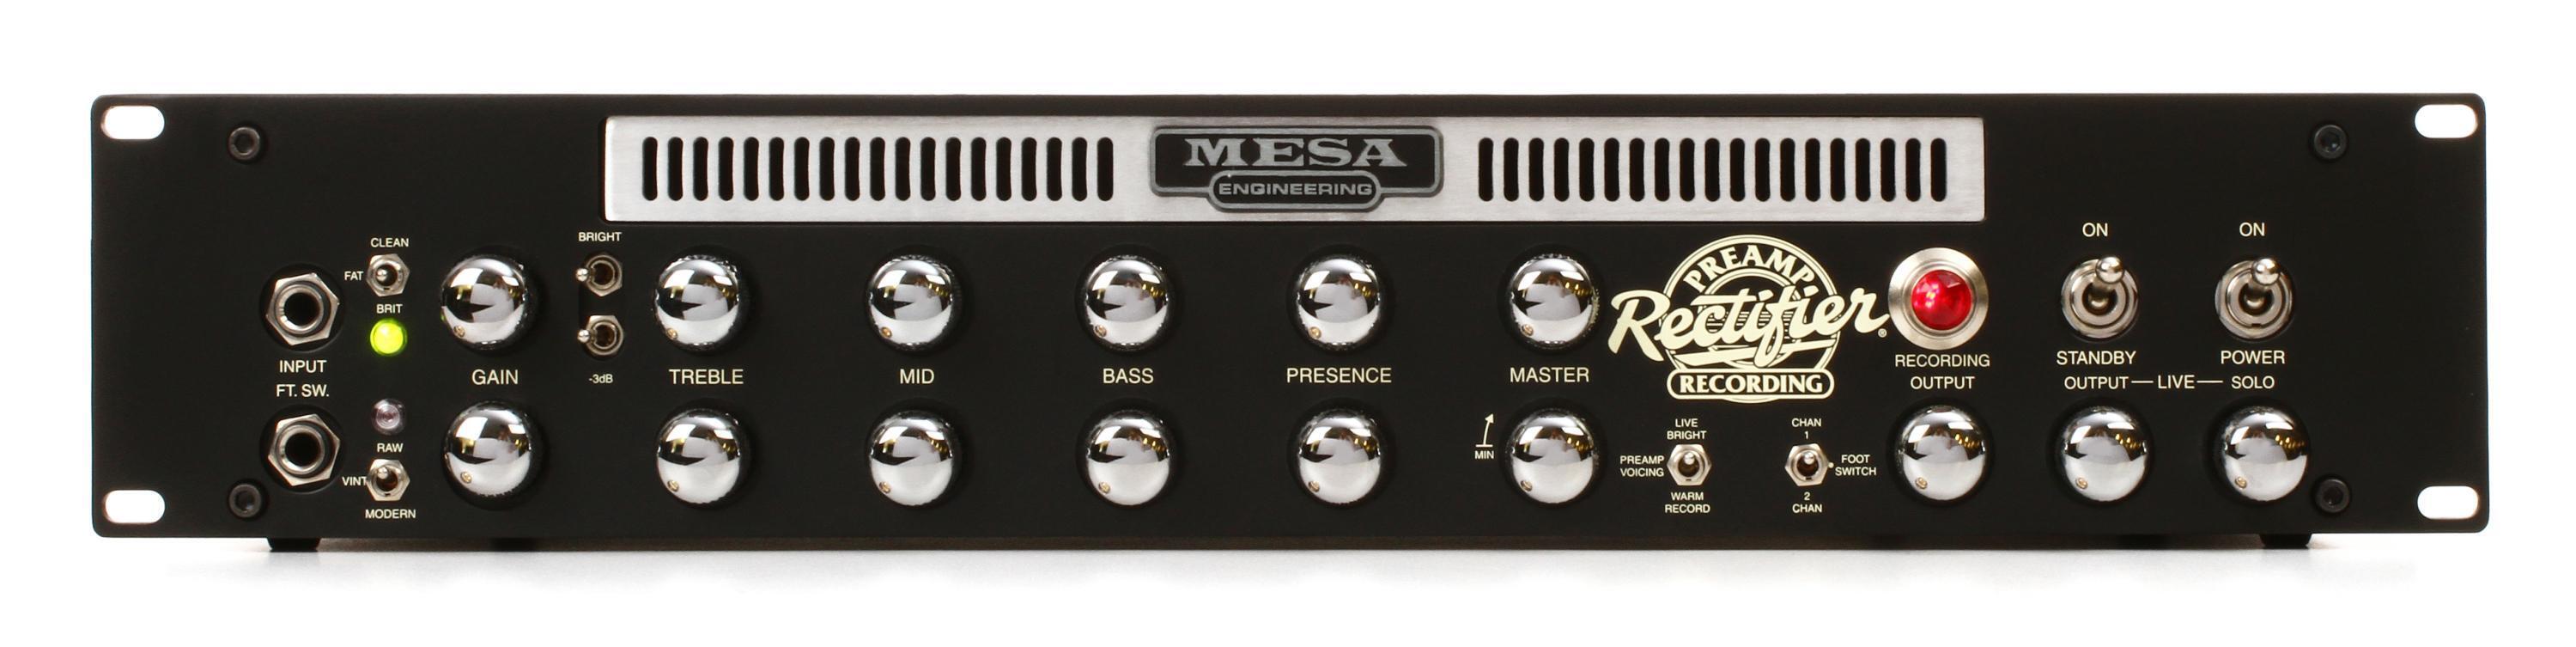 Mesa/Boogie Rectifier Recording Preamp - 2-channel Tube Preamp